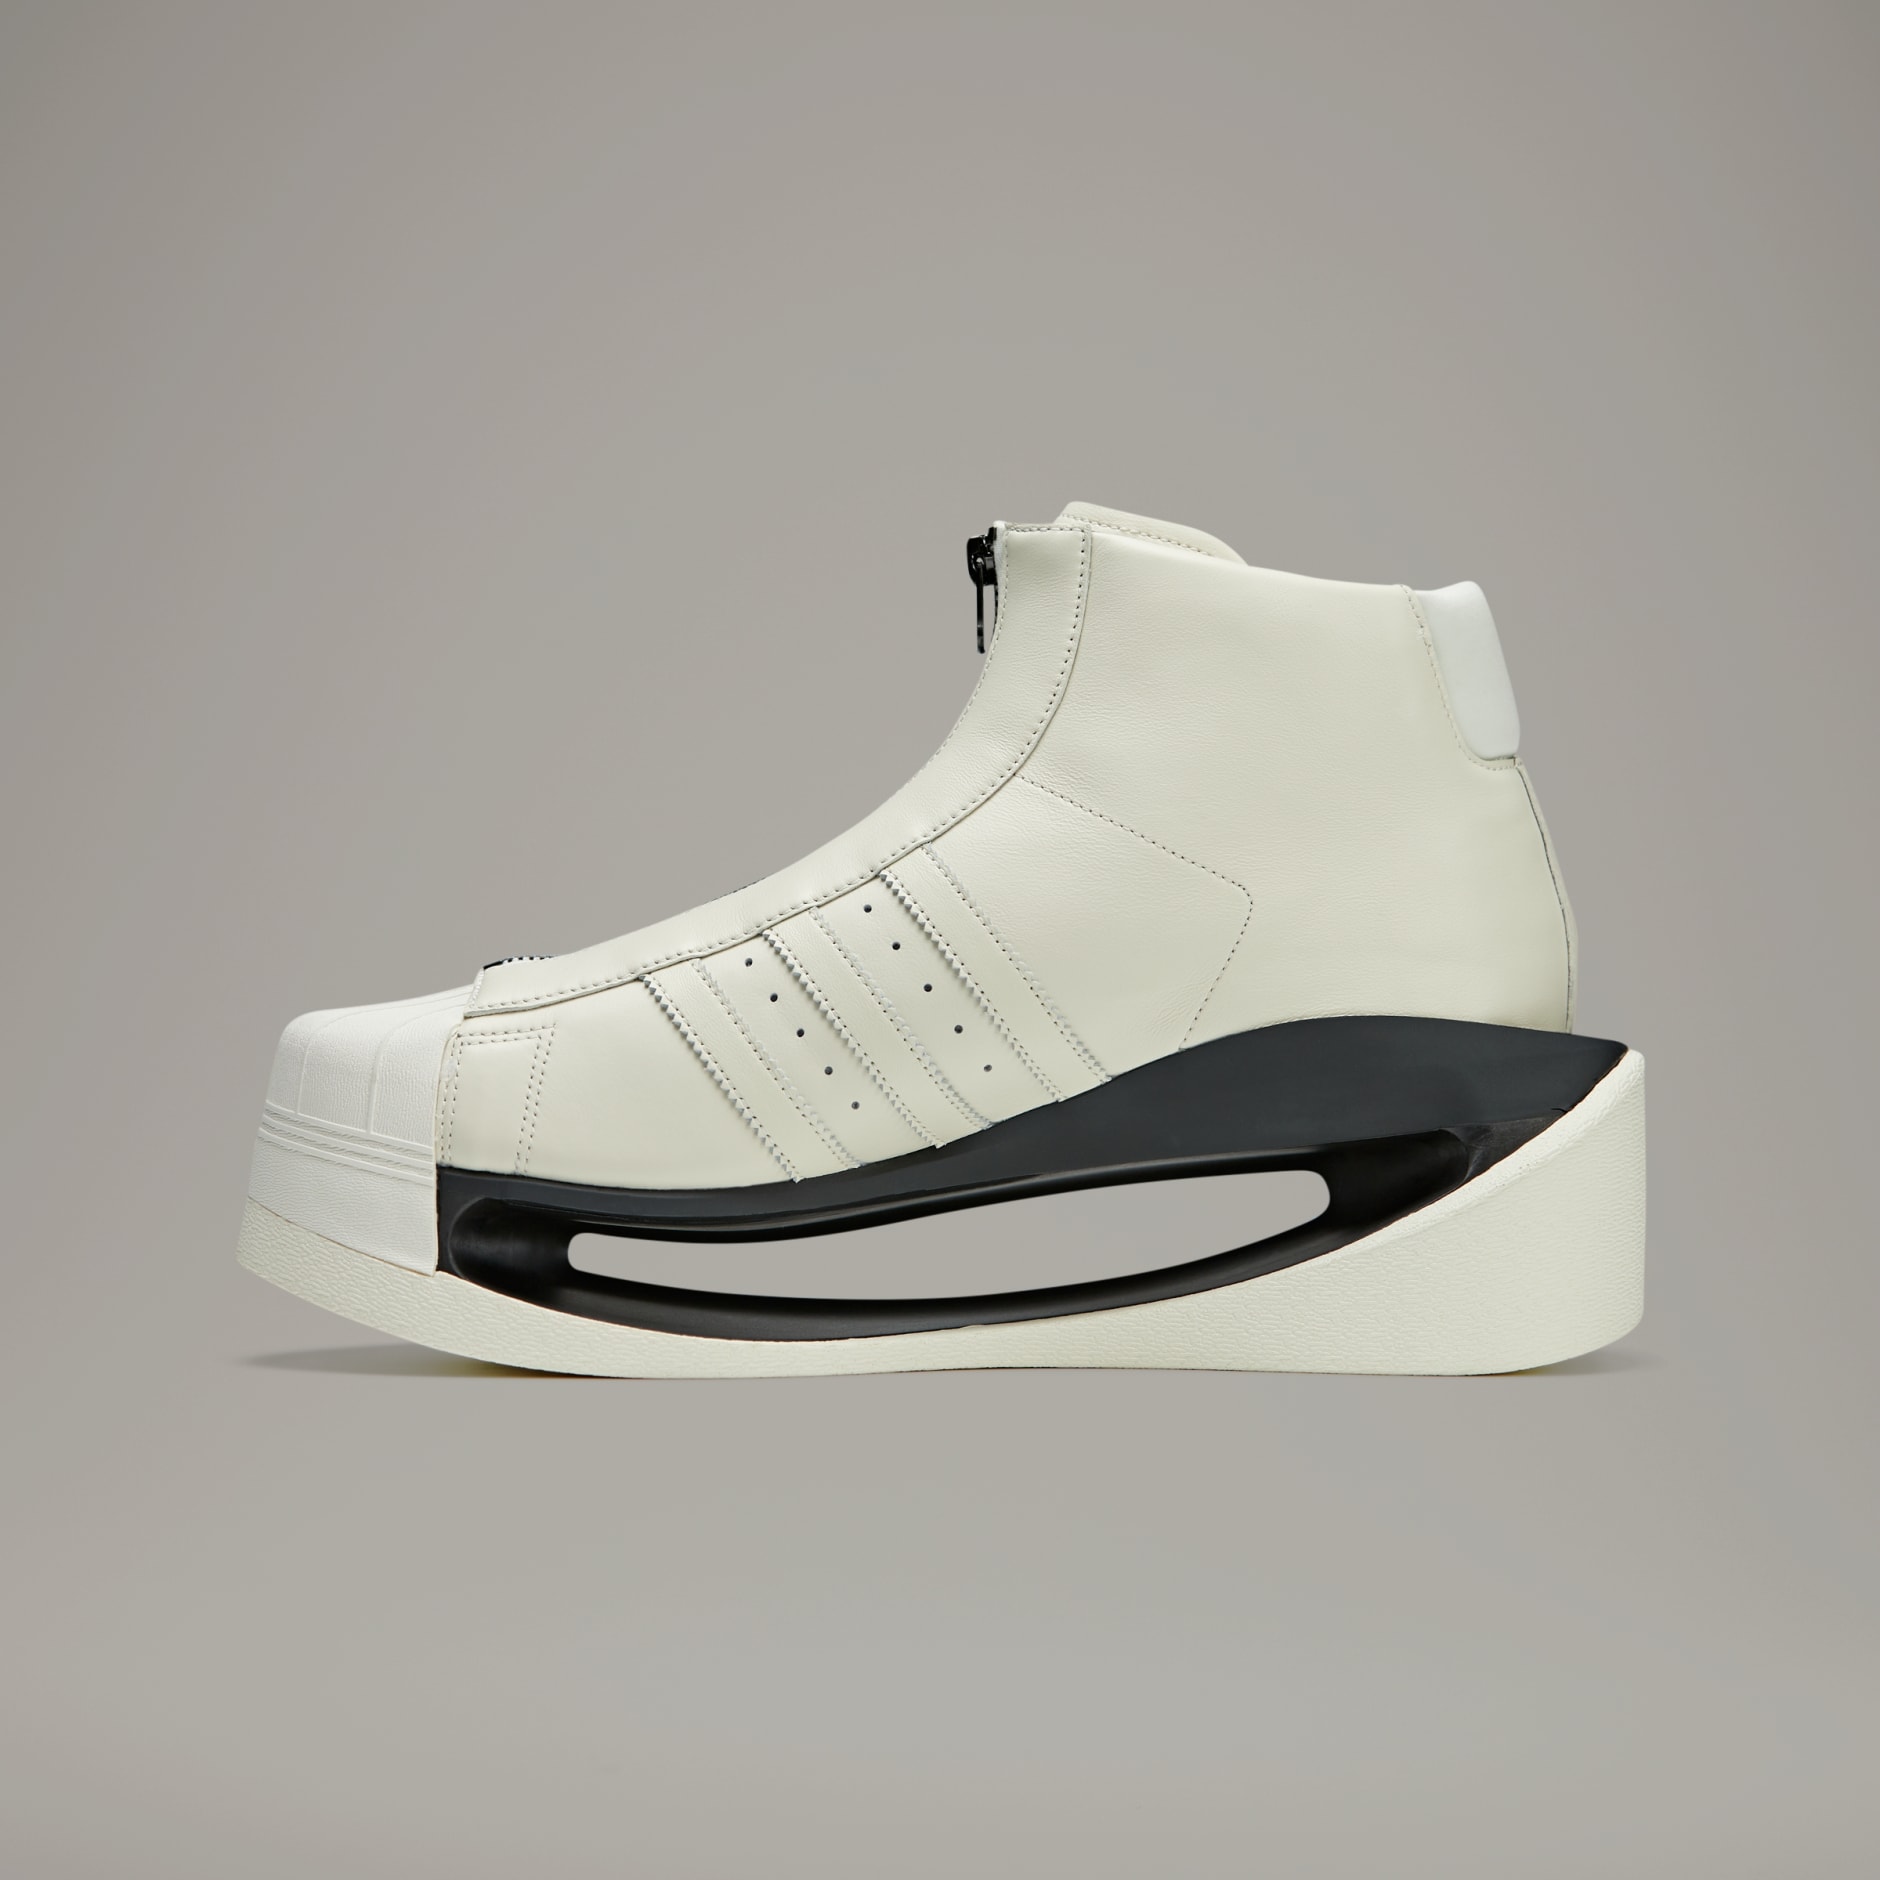 All products - Y-3 Gendo Pro Model Shoes - White | adidas South Africa